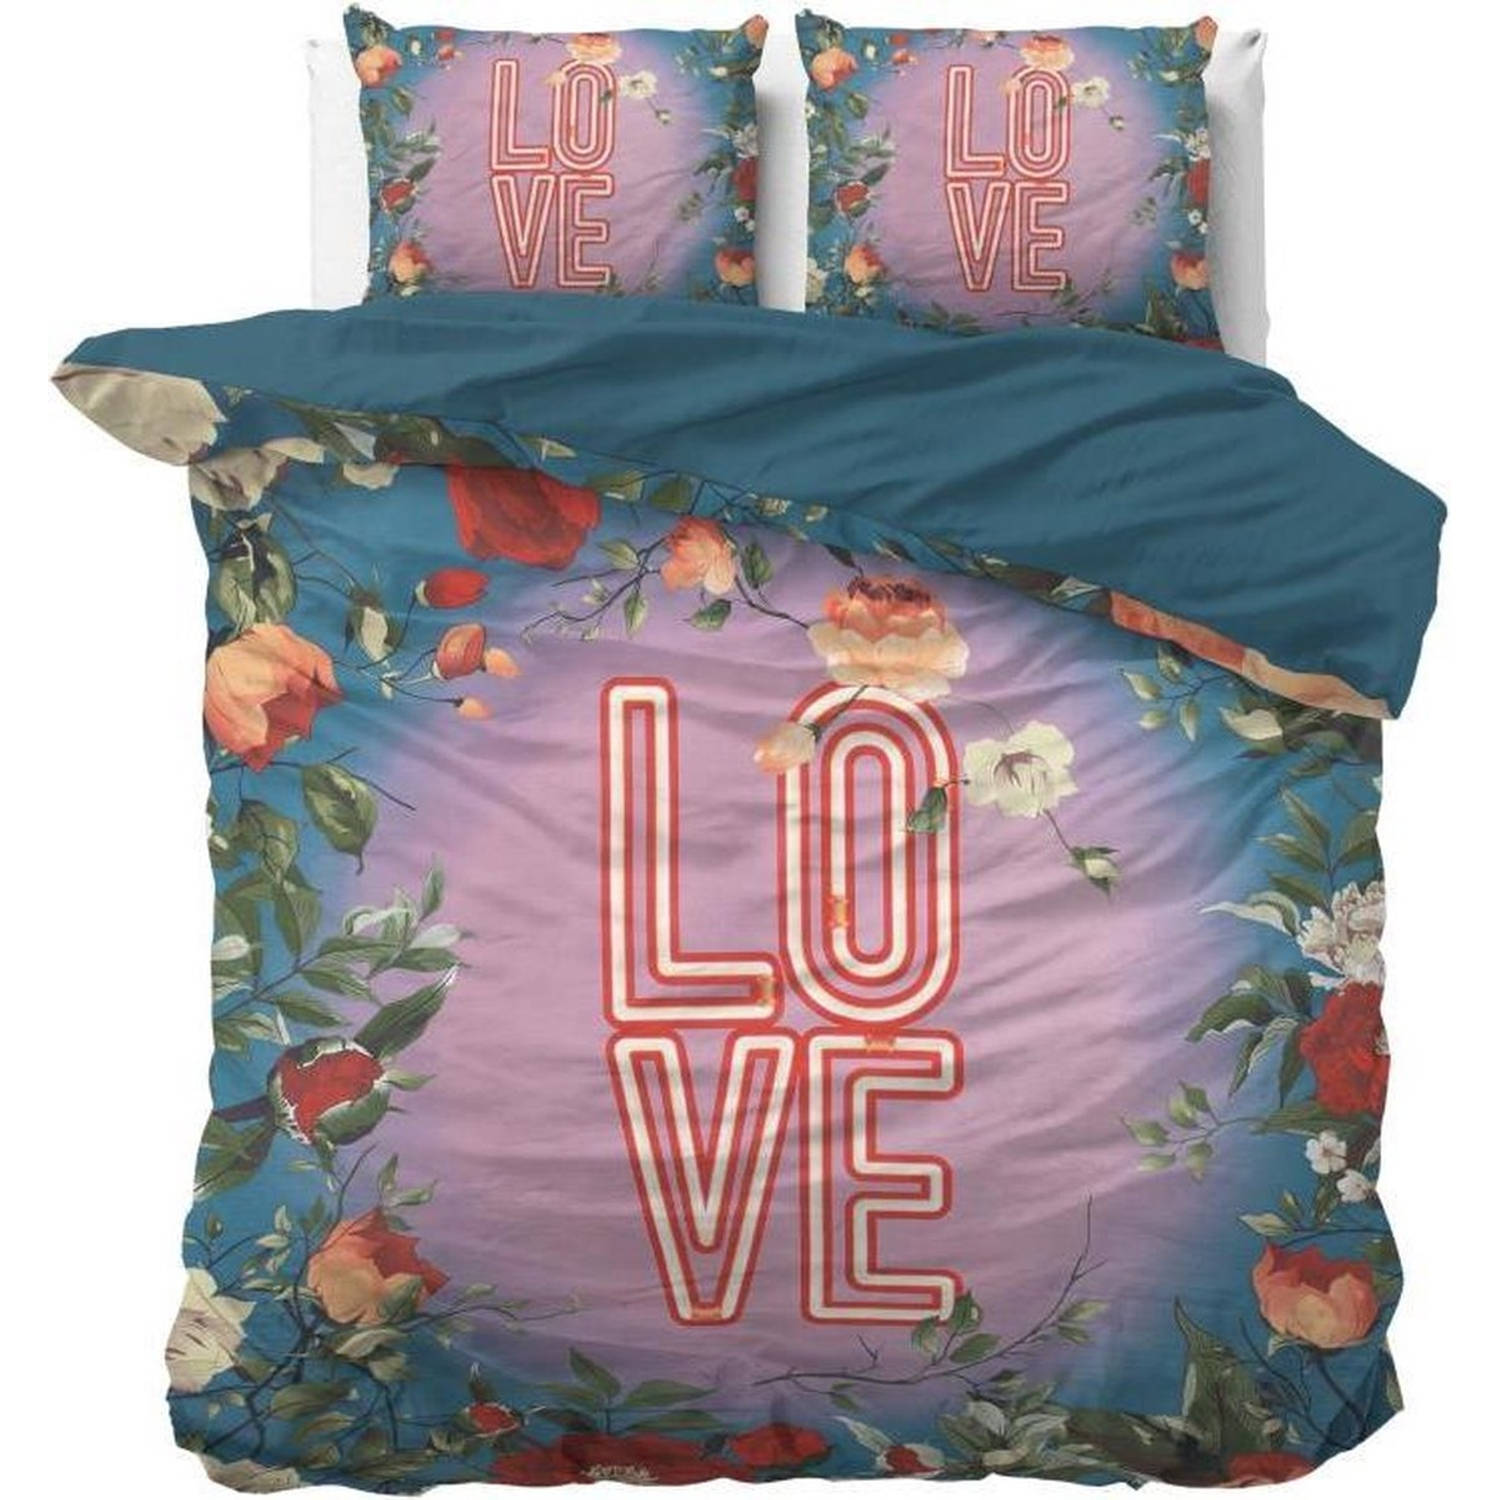 Dreamhouse Bedding Dbo Dh Led Love Turquoise 240x220